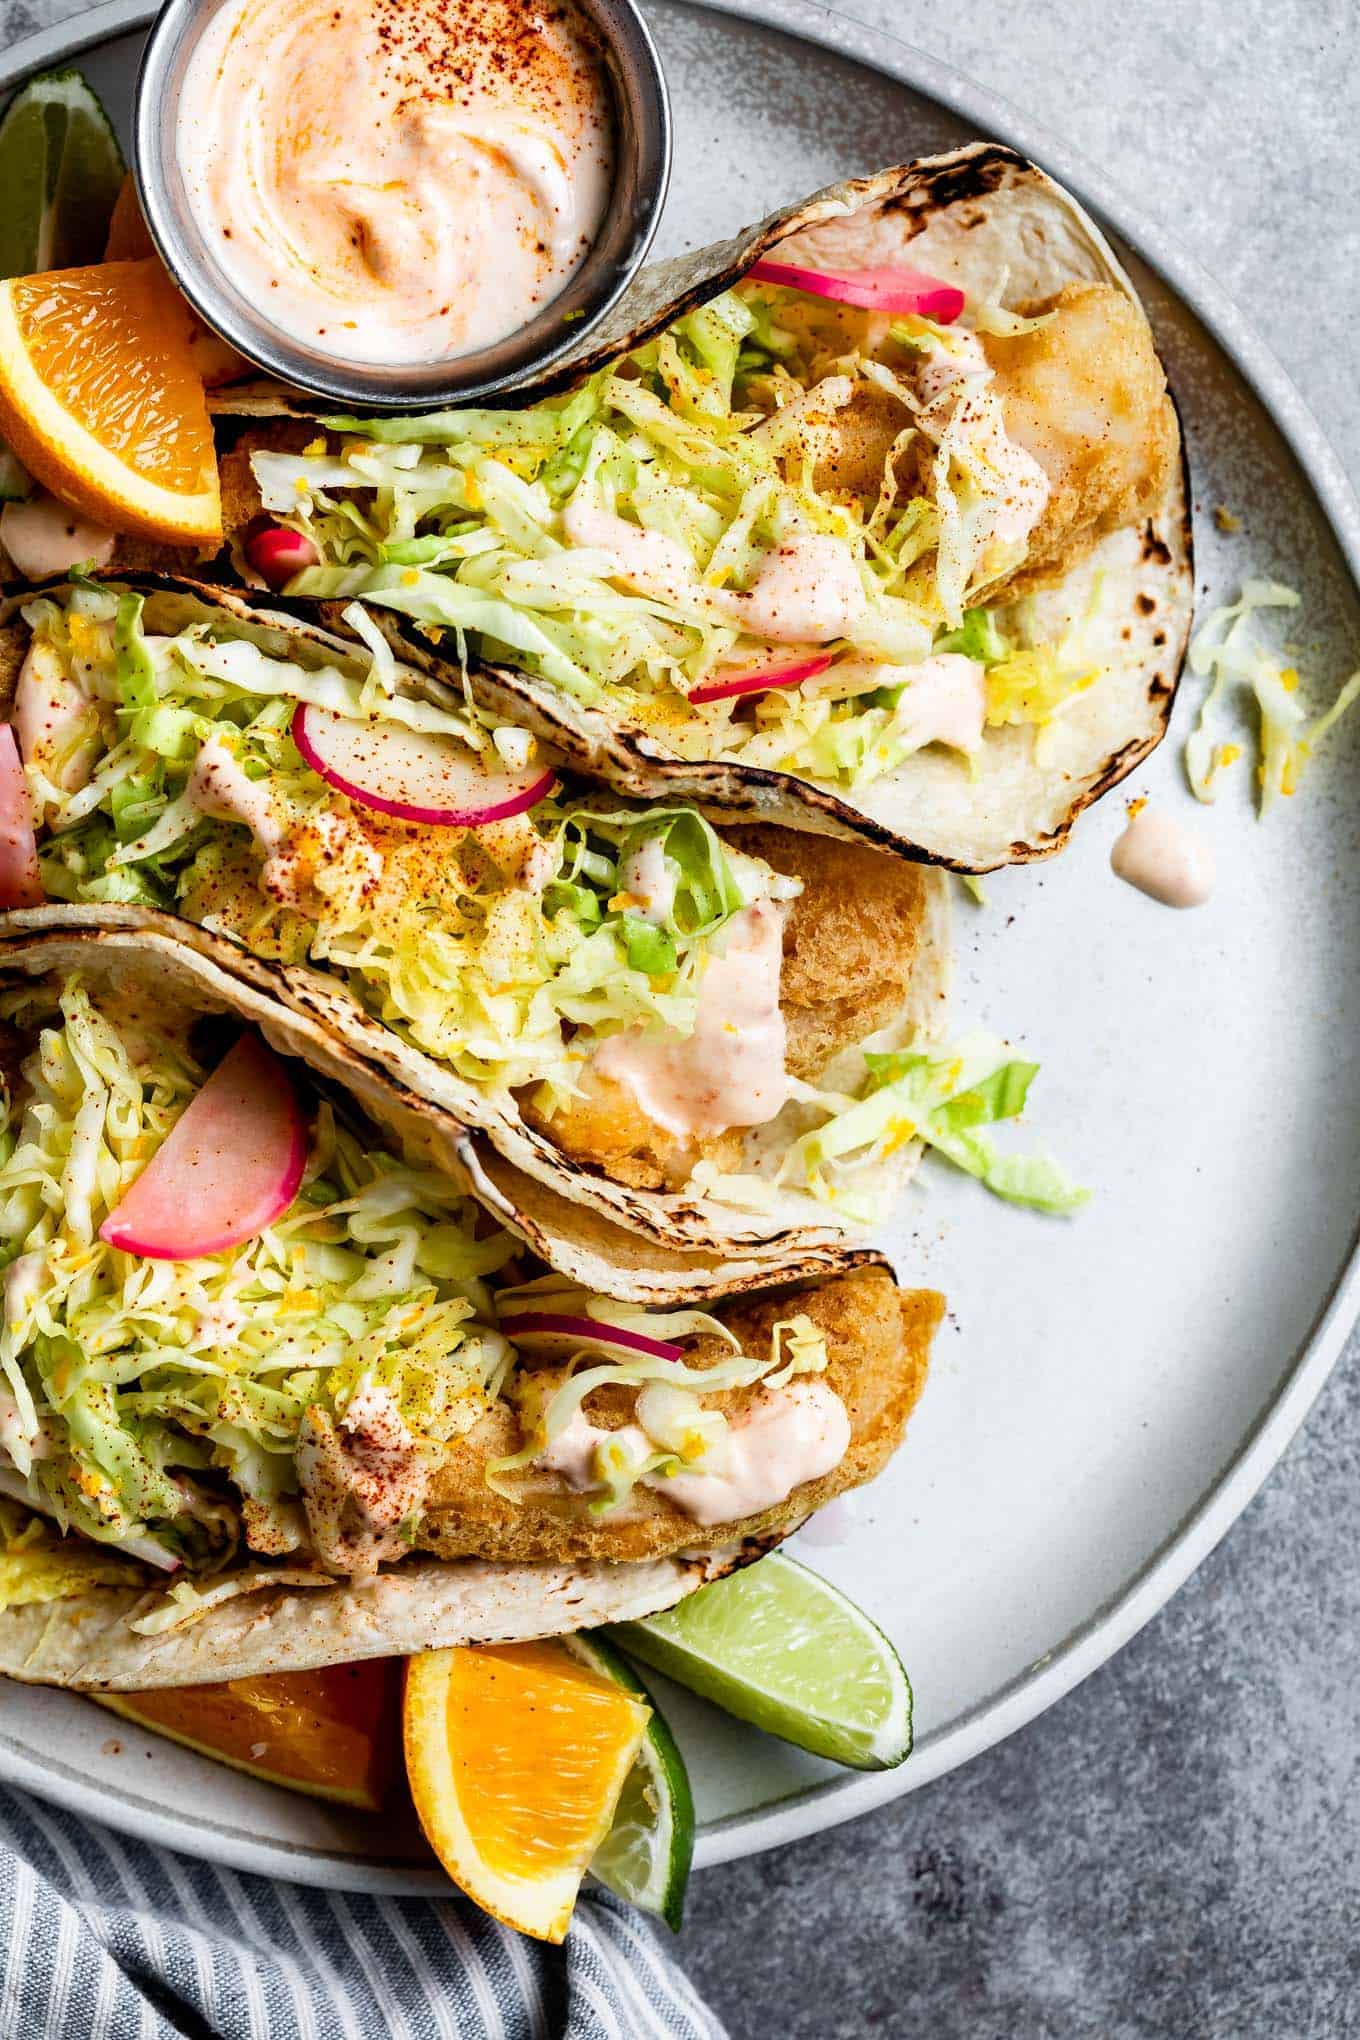 Gluten-Free Fried Fish Tacos with Chipotle Cream Sauce